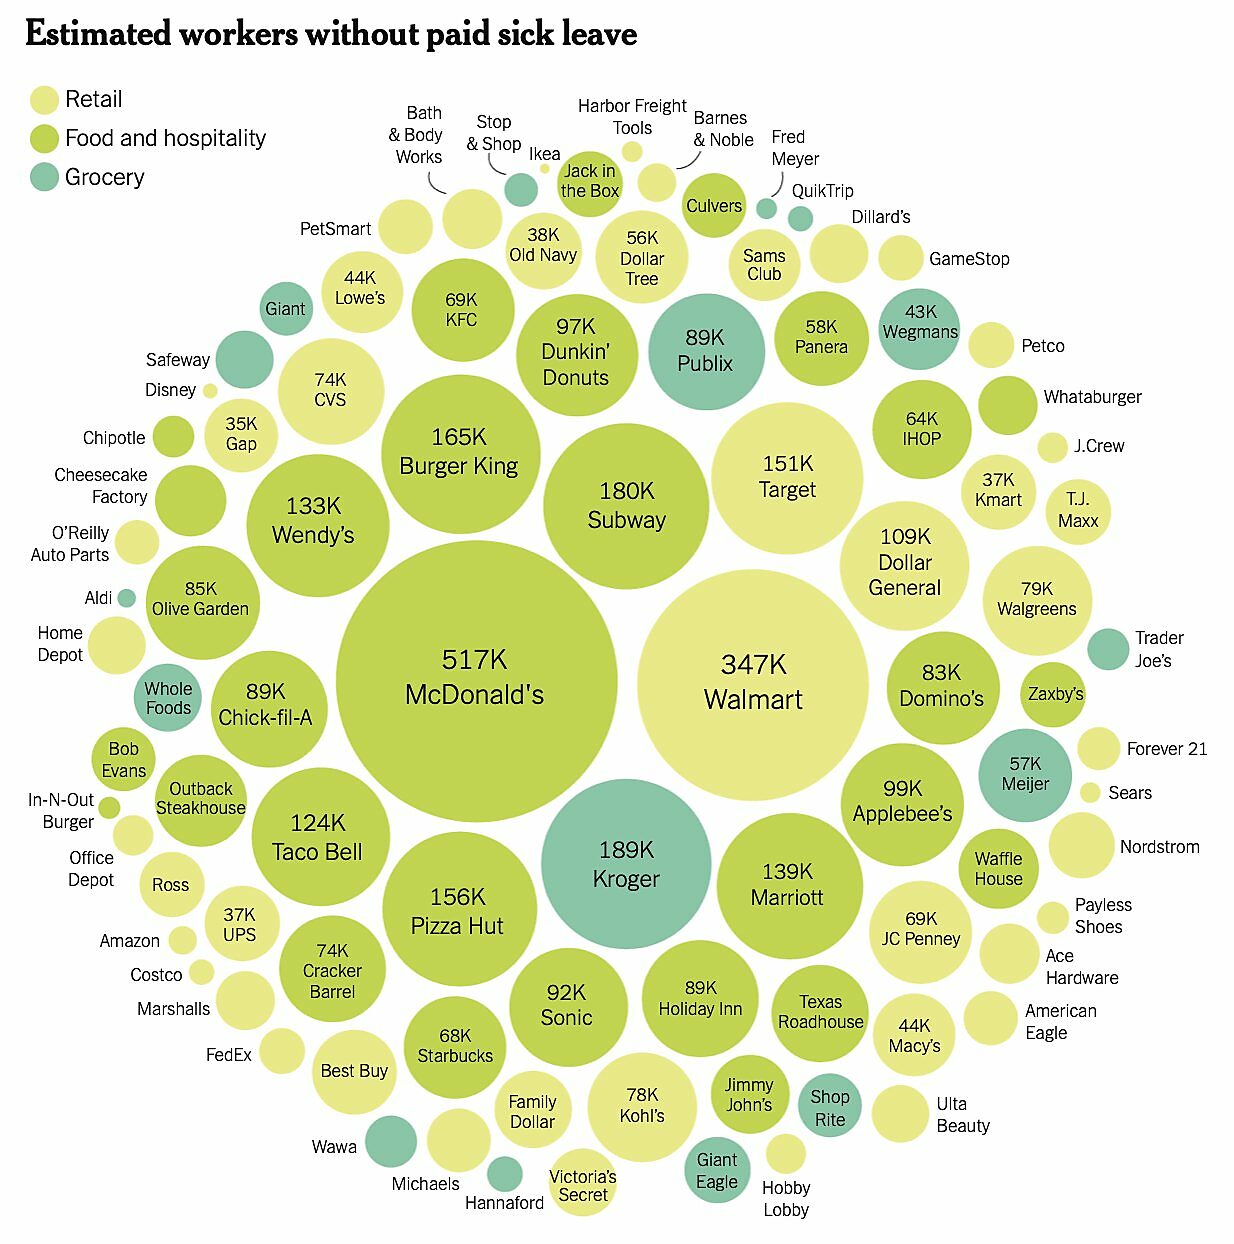 Major employers without paid sick leave